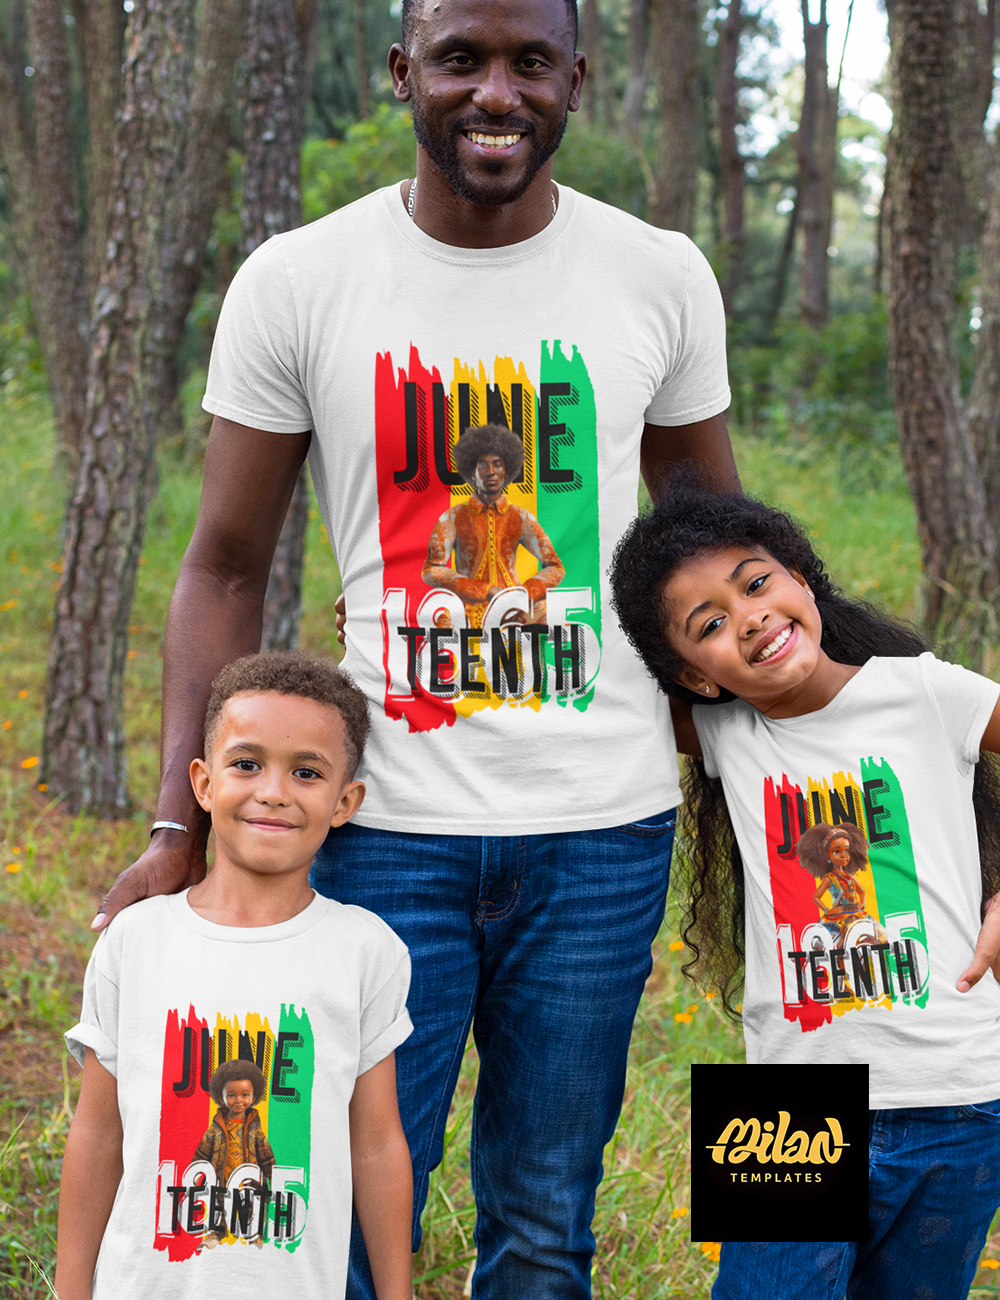 mockup-of-a-man-with-his-kids-wearing-t-shirts-30600